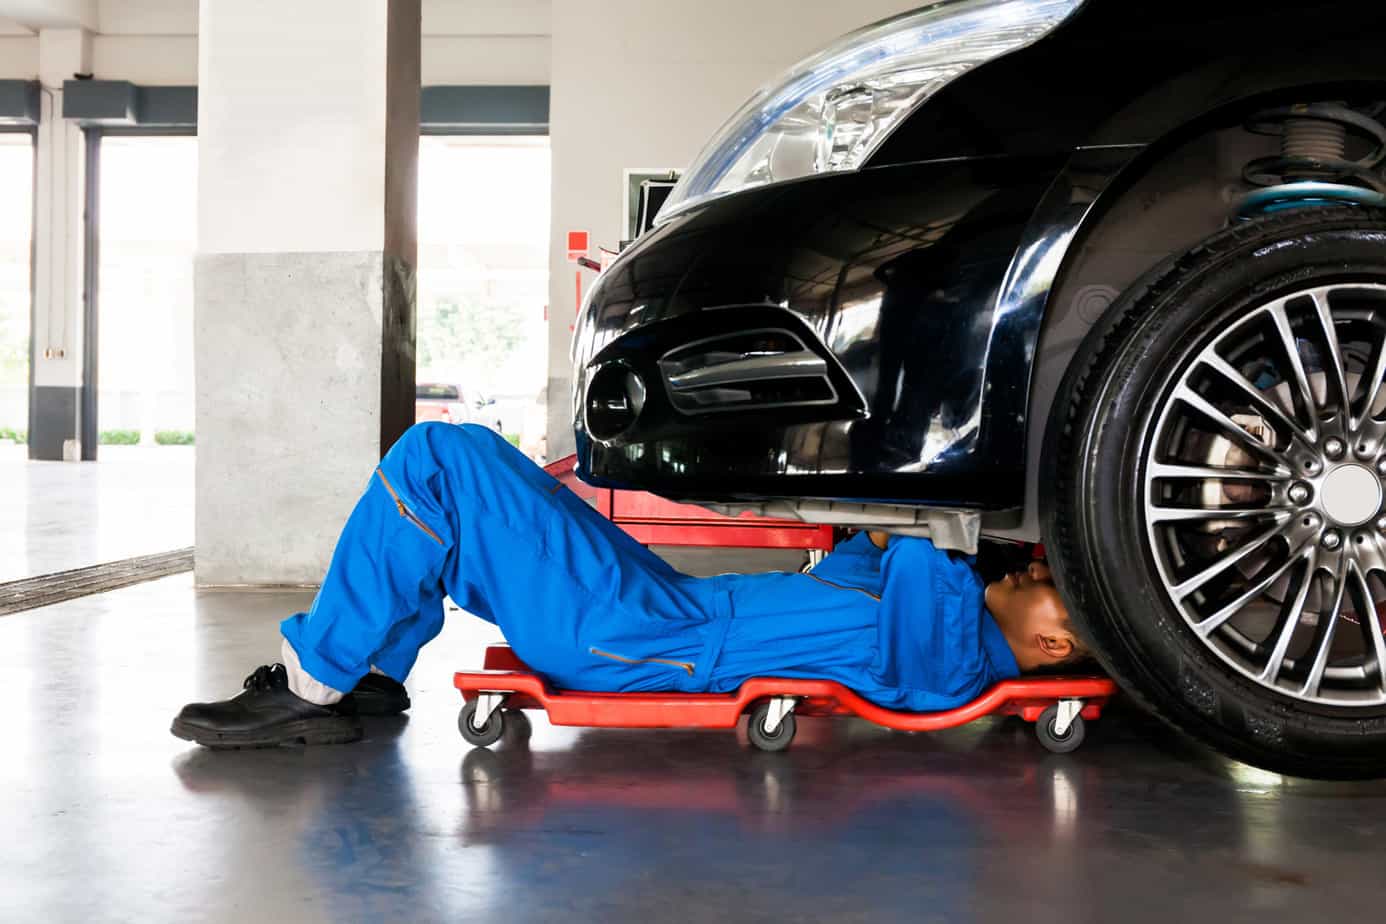 Mechanic in blue uniform lying down and working under car | Auto repair industry